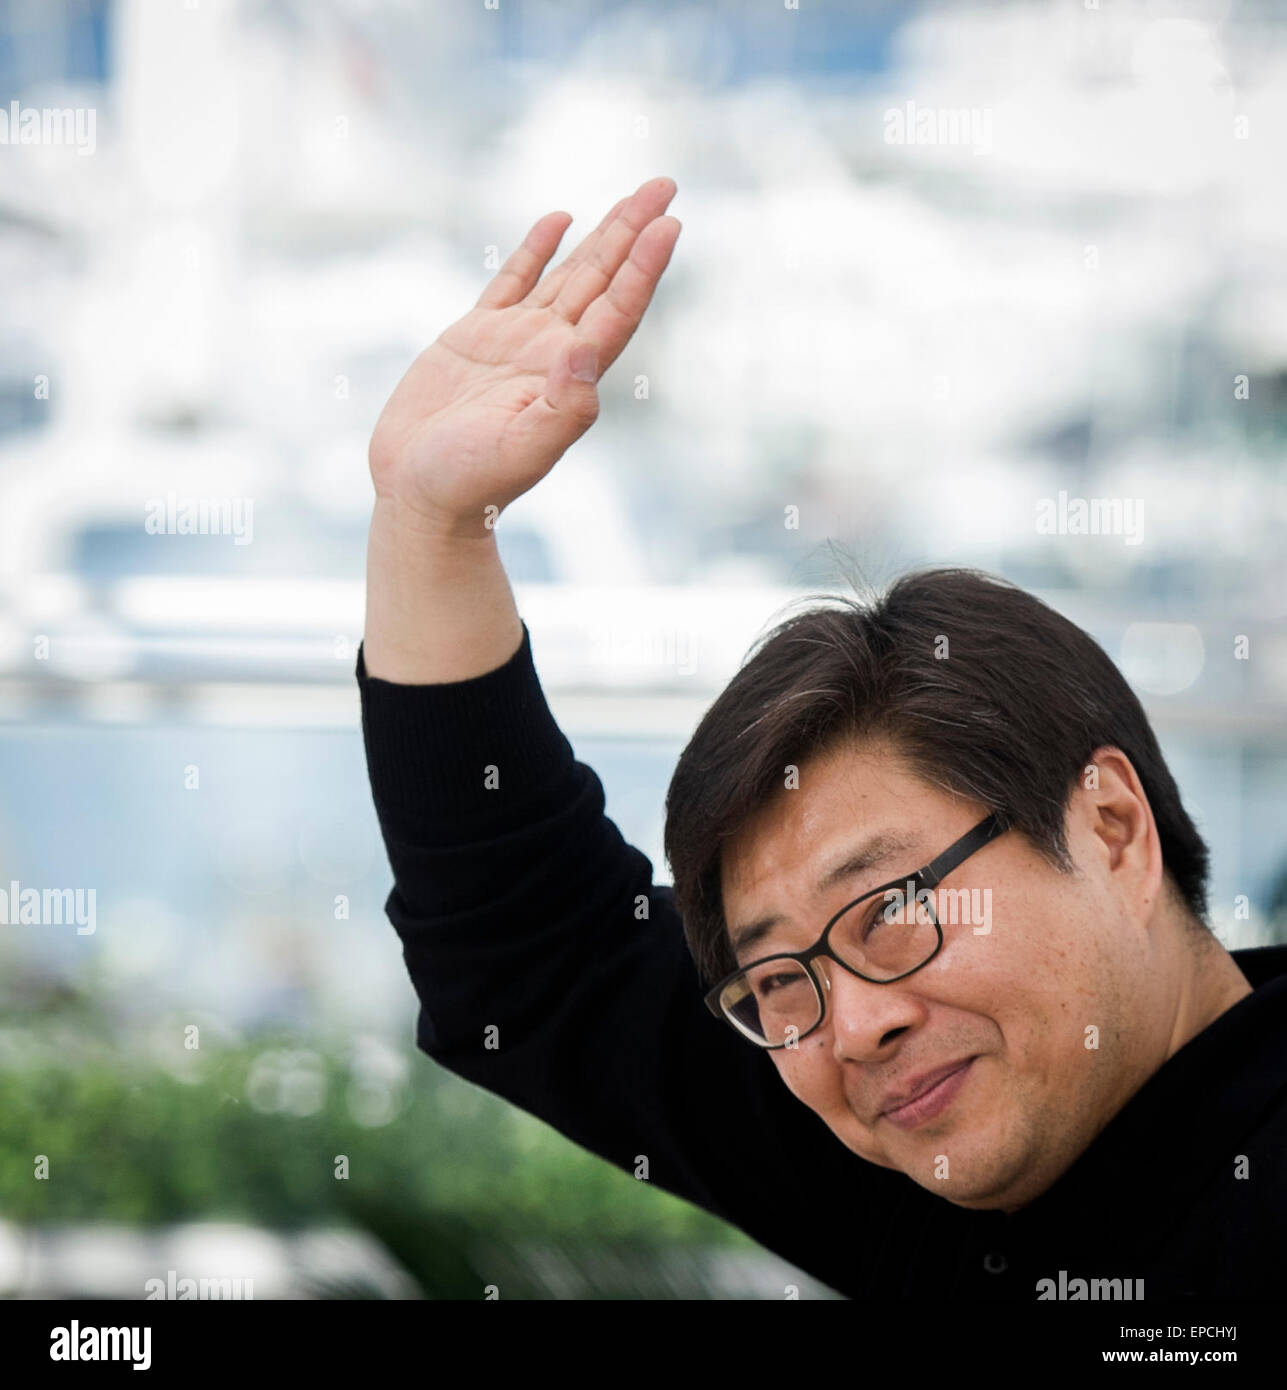 (150516) -- CANNES, May 16, 2015 (Xinhua) -- South Korean director Oh Seung-Uk poses in a photocall for the film 'The Shameless' at the 68th Cannes Film Festival in Cannes, southeastern France, on May 16, 2015. (Xinhua/Chen Xiaowei) Stock Photo